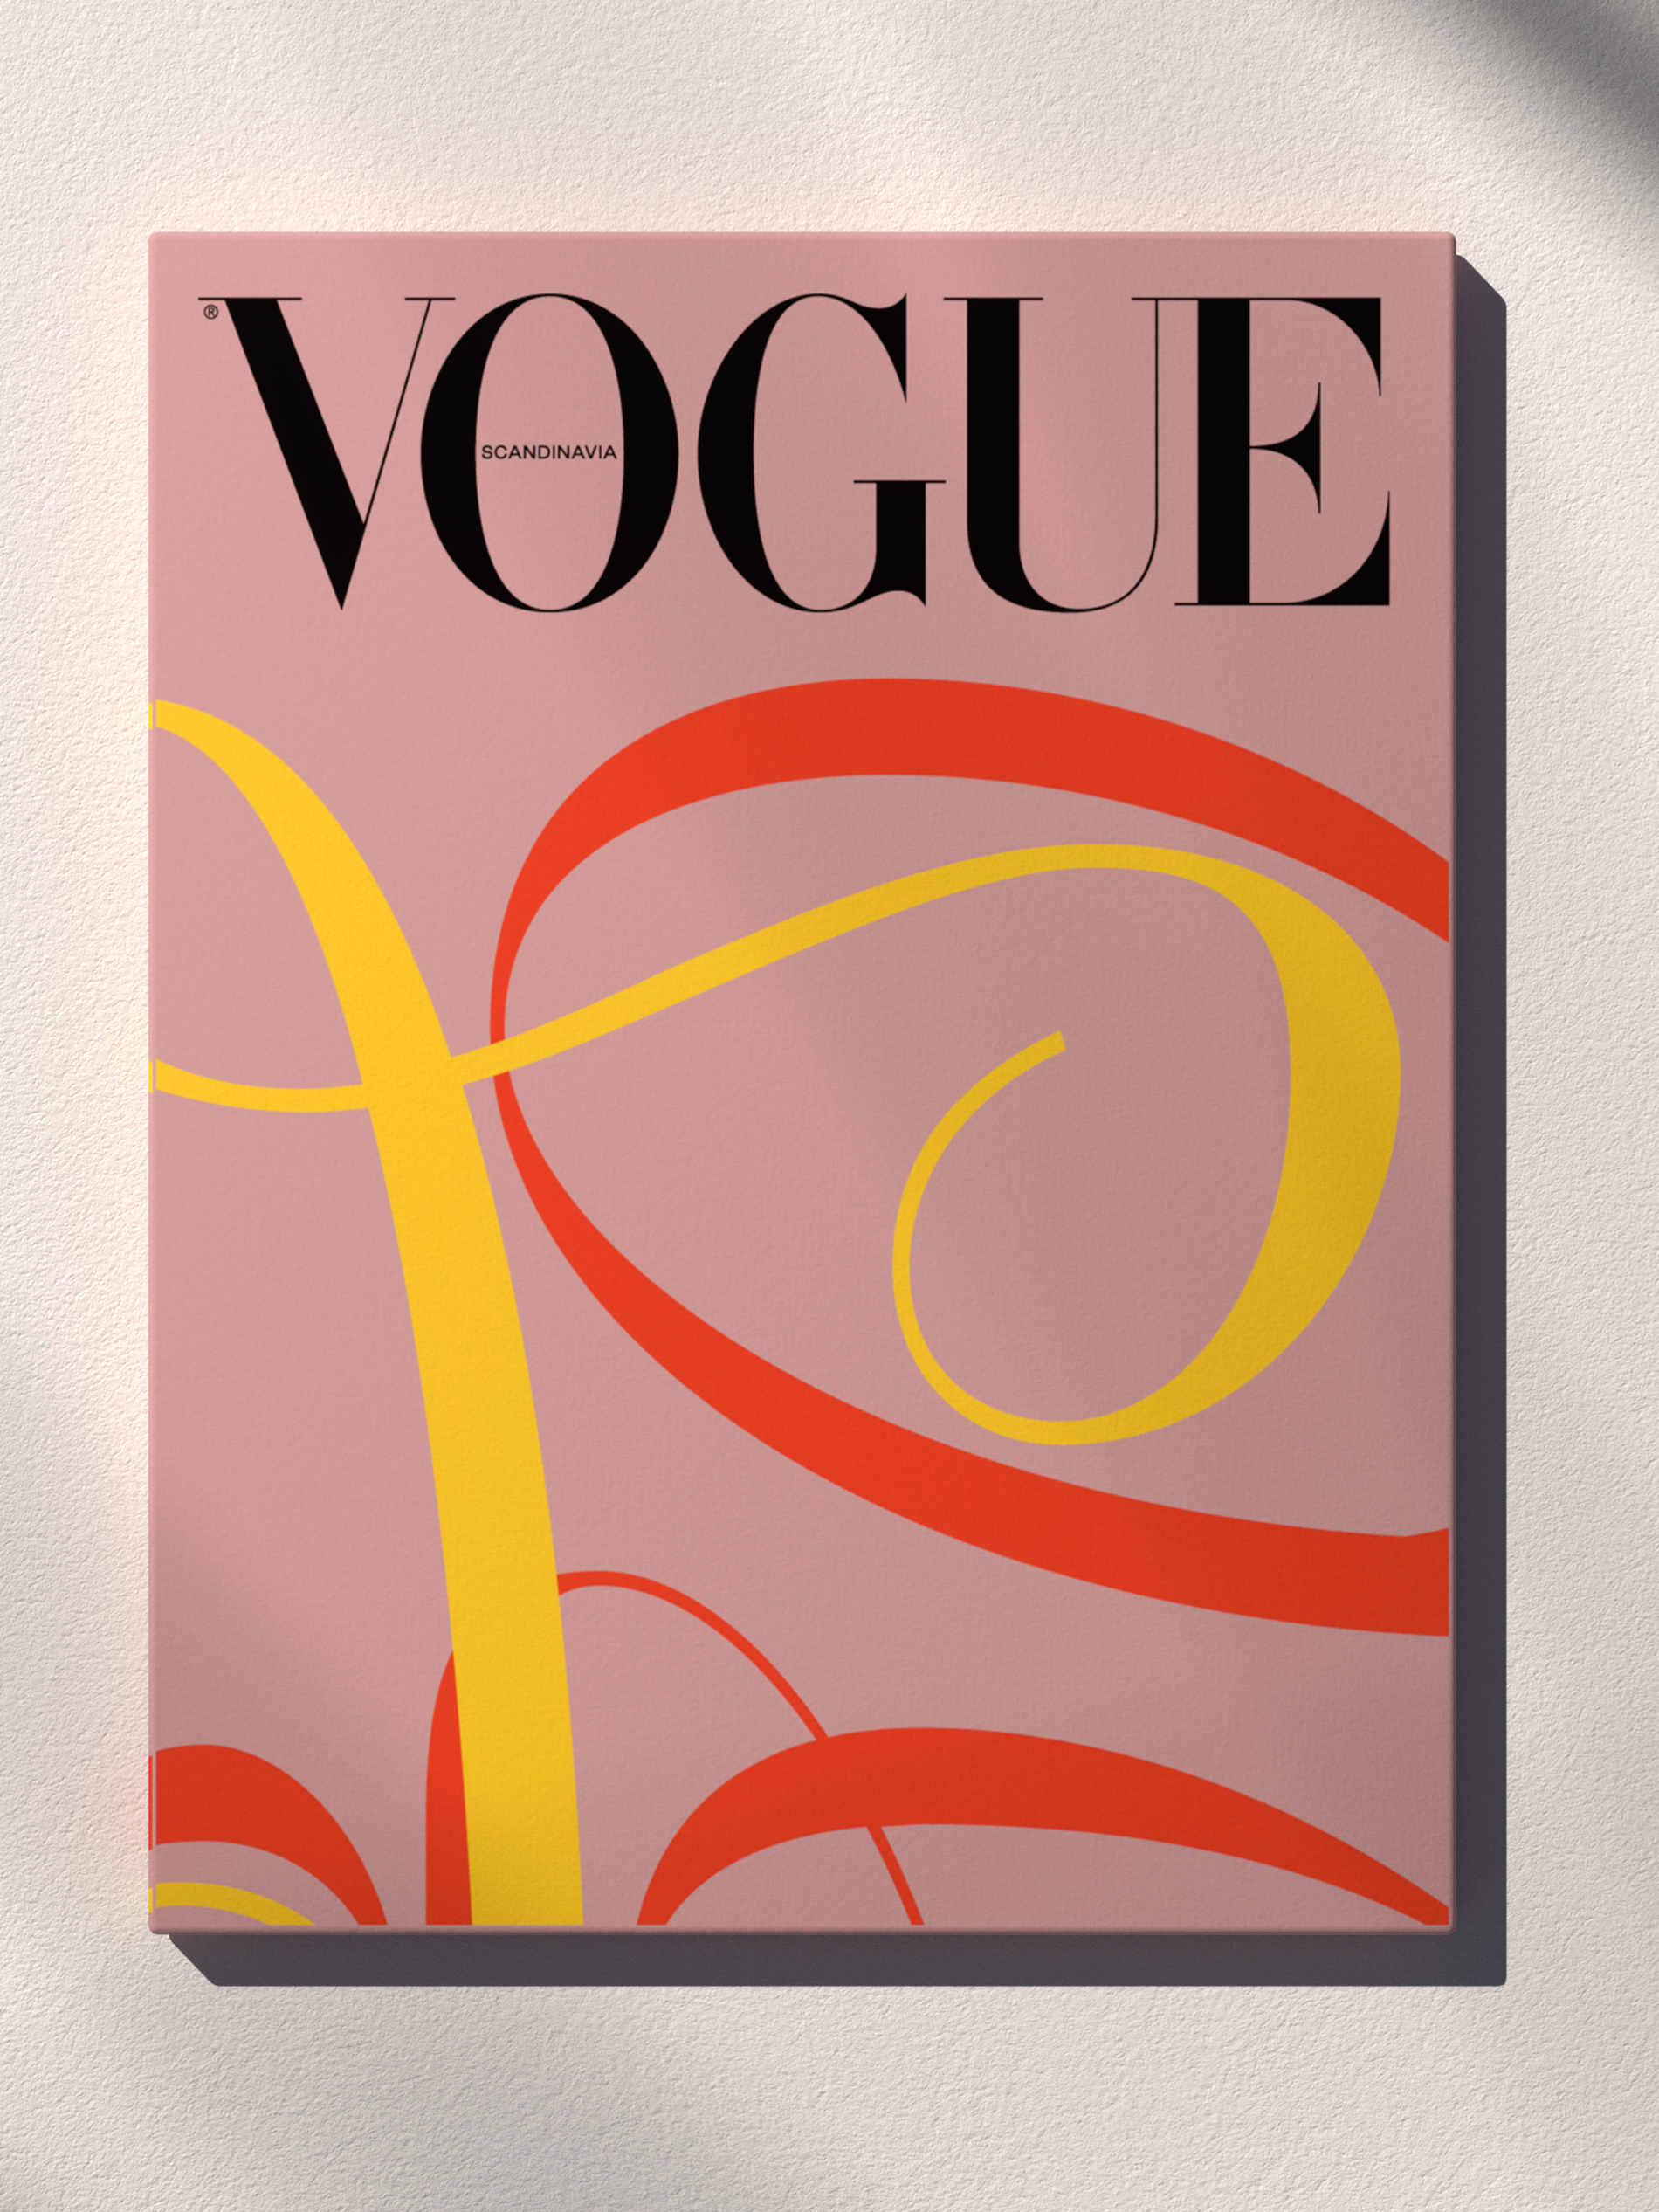 vogue coffee table book